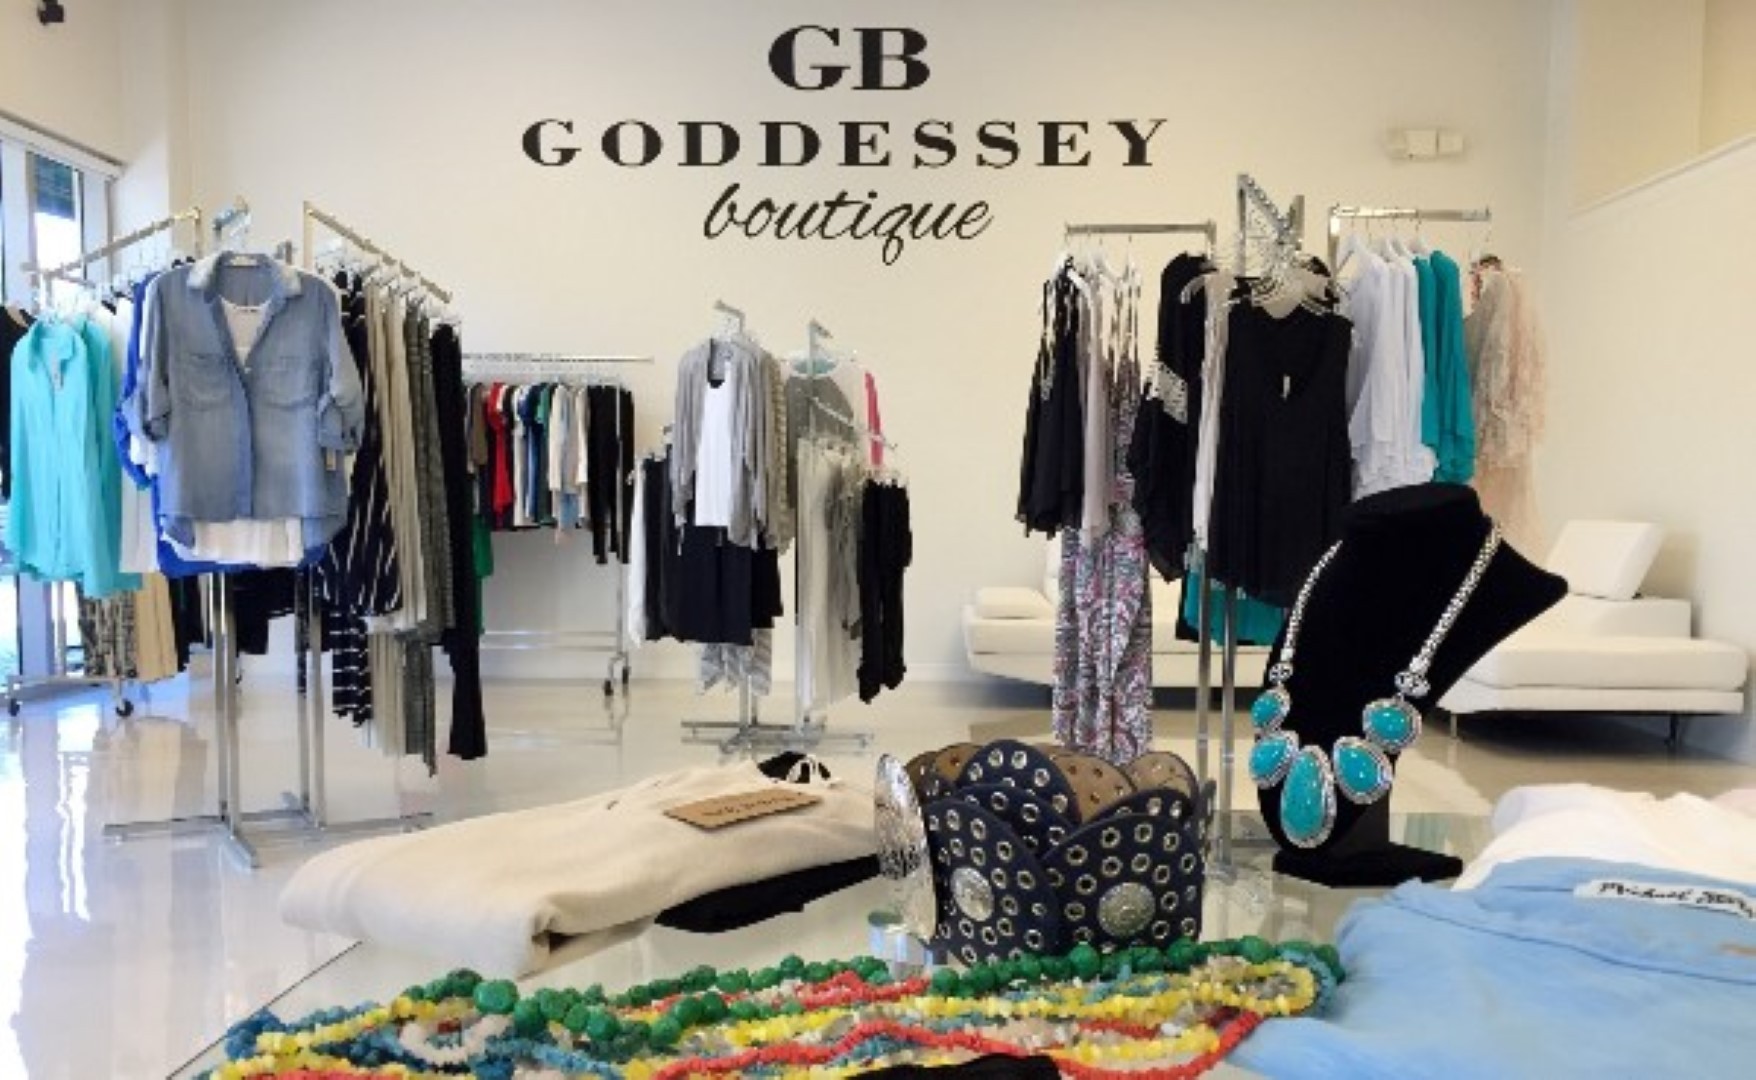 when-goddessey-becomes-a-boutique-and-an-adjective-at-the-same-time-crist-almighty-florida